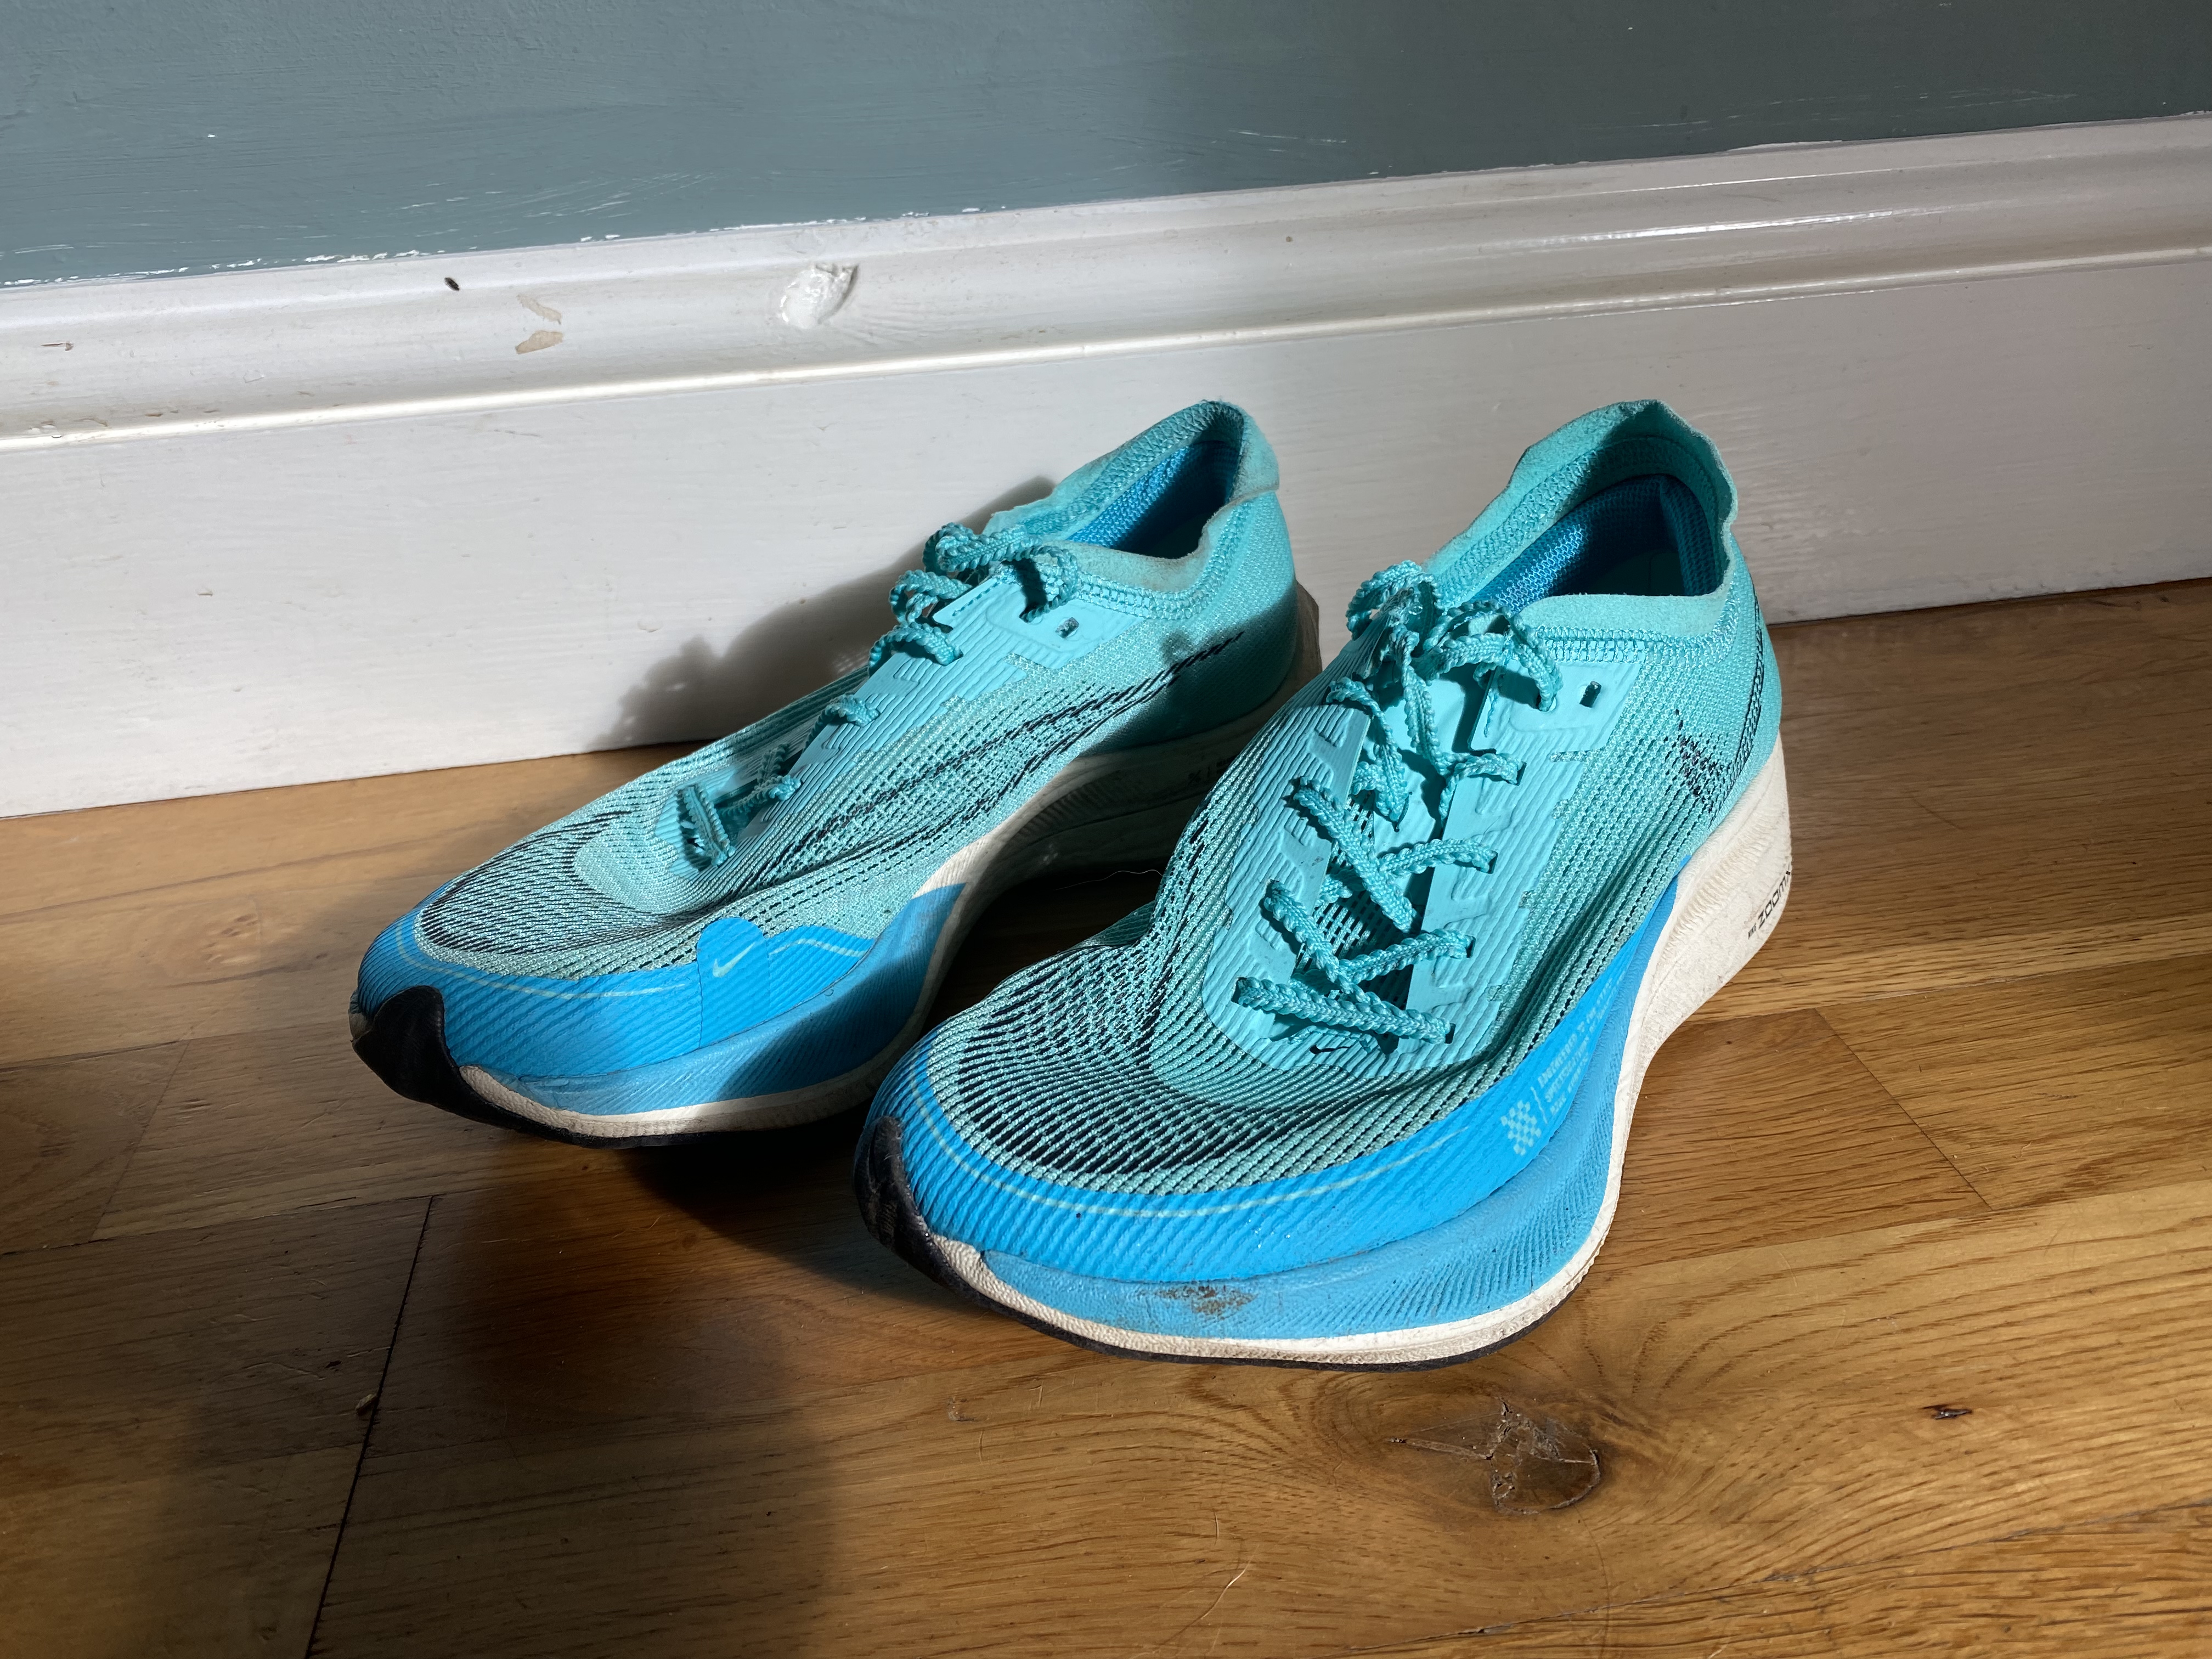 A front-on view of the Nike Vaporfly Next% 2